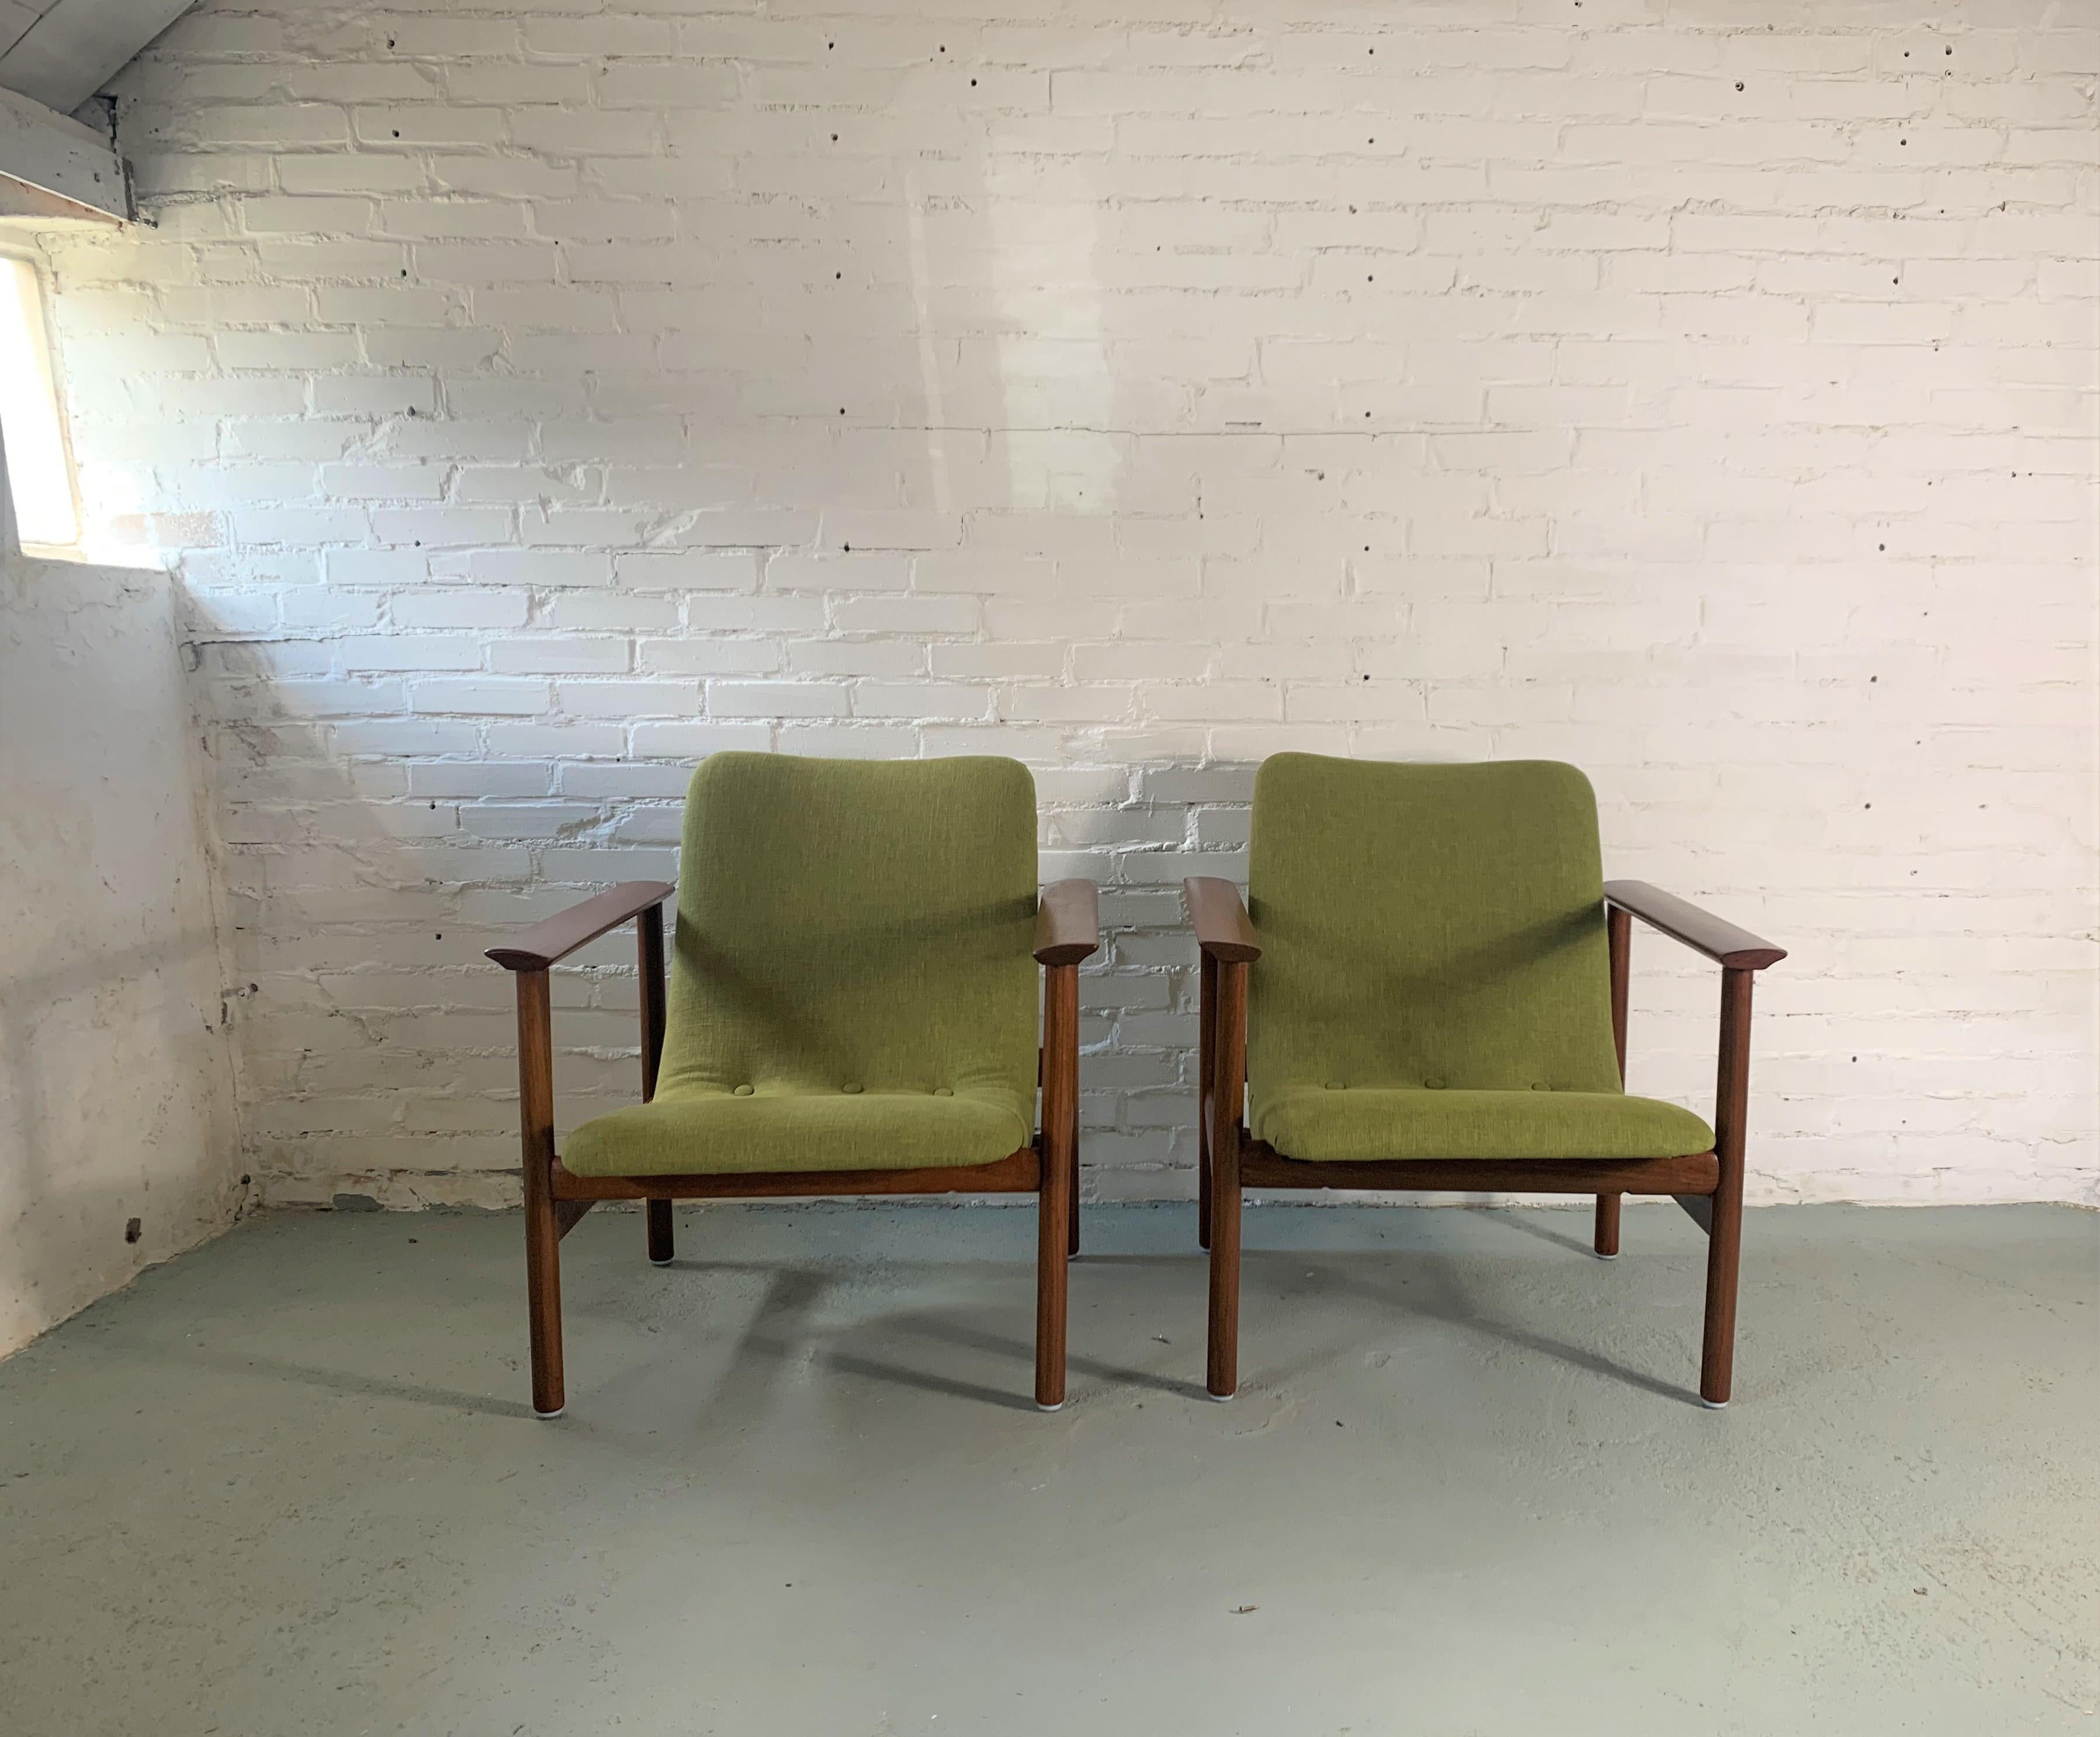 Teak frame and new reupholstered beautiful Scandinavian modern armchairs. The style is reminiscent of the works of Finn Juhl and Fredrik Kayser. Very comfortable.